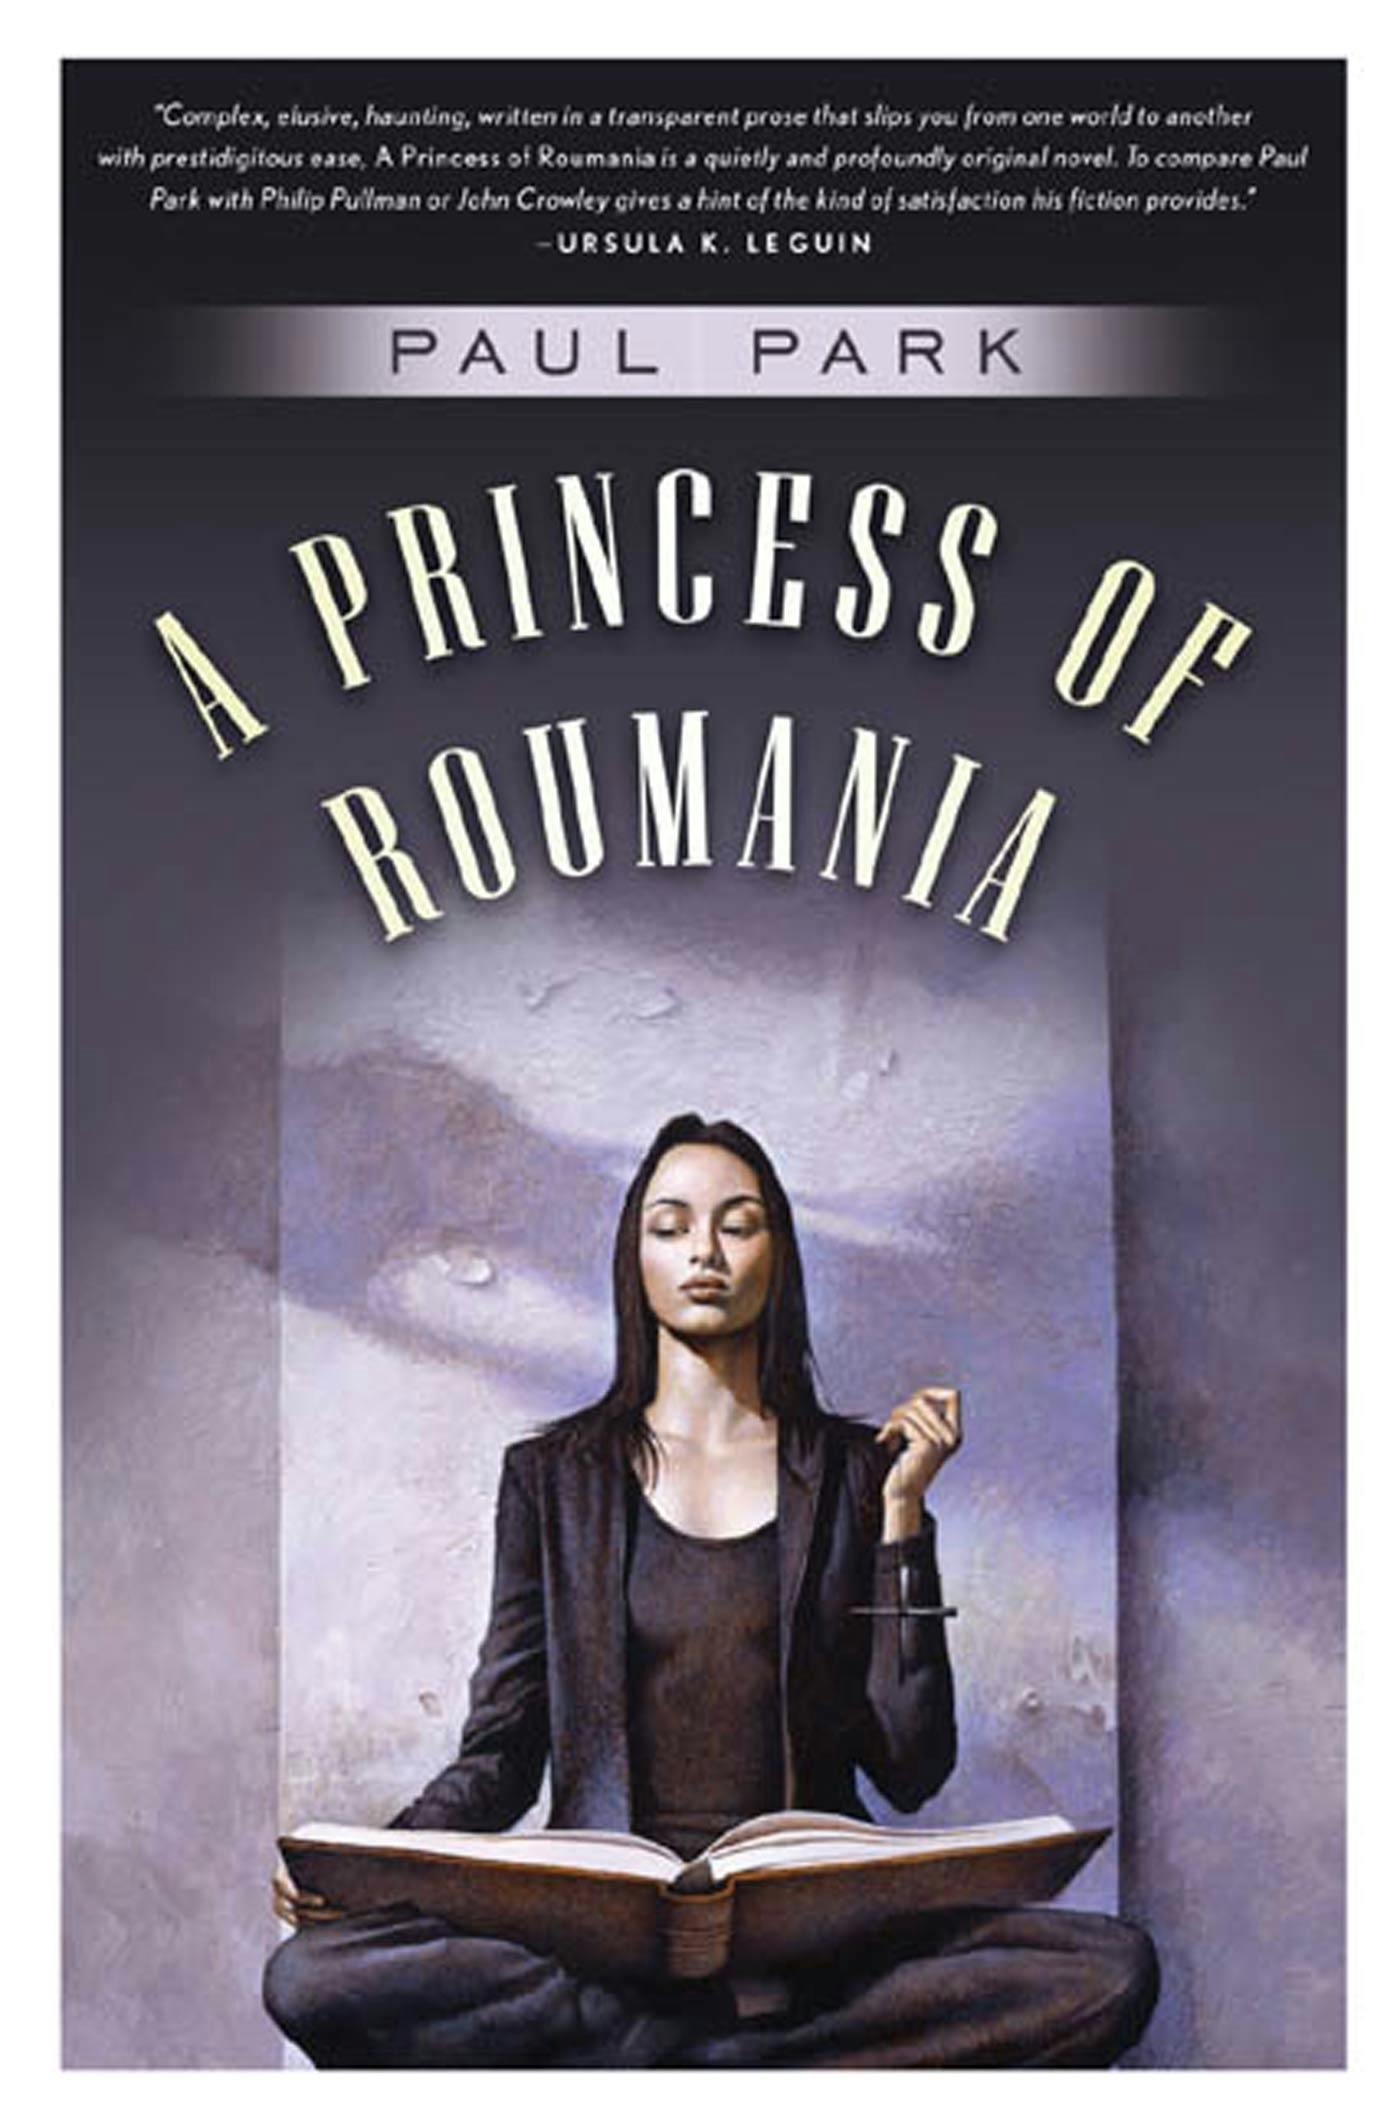 Cover for the book titled as: A Princess of Roumania